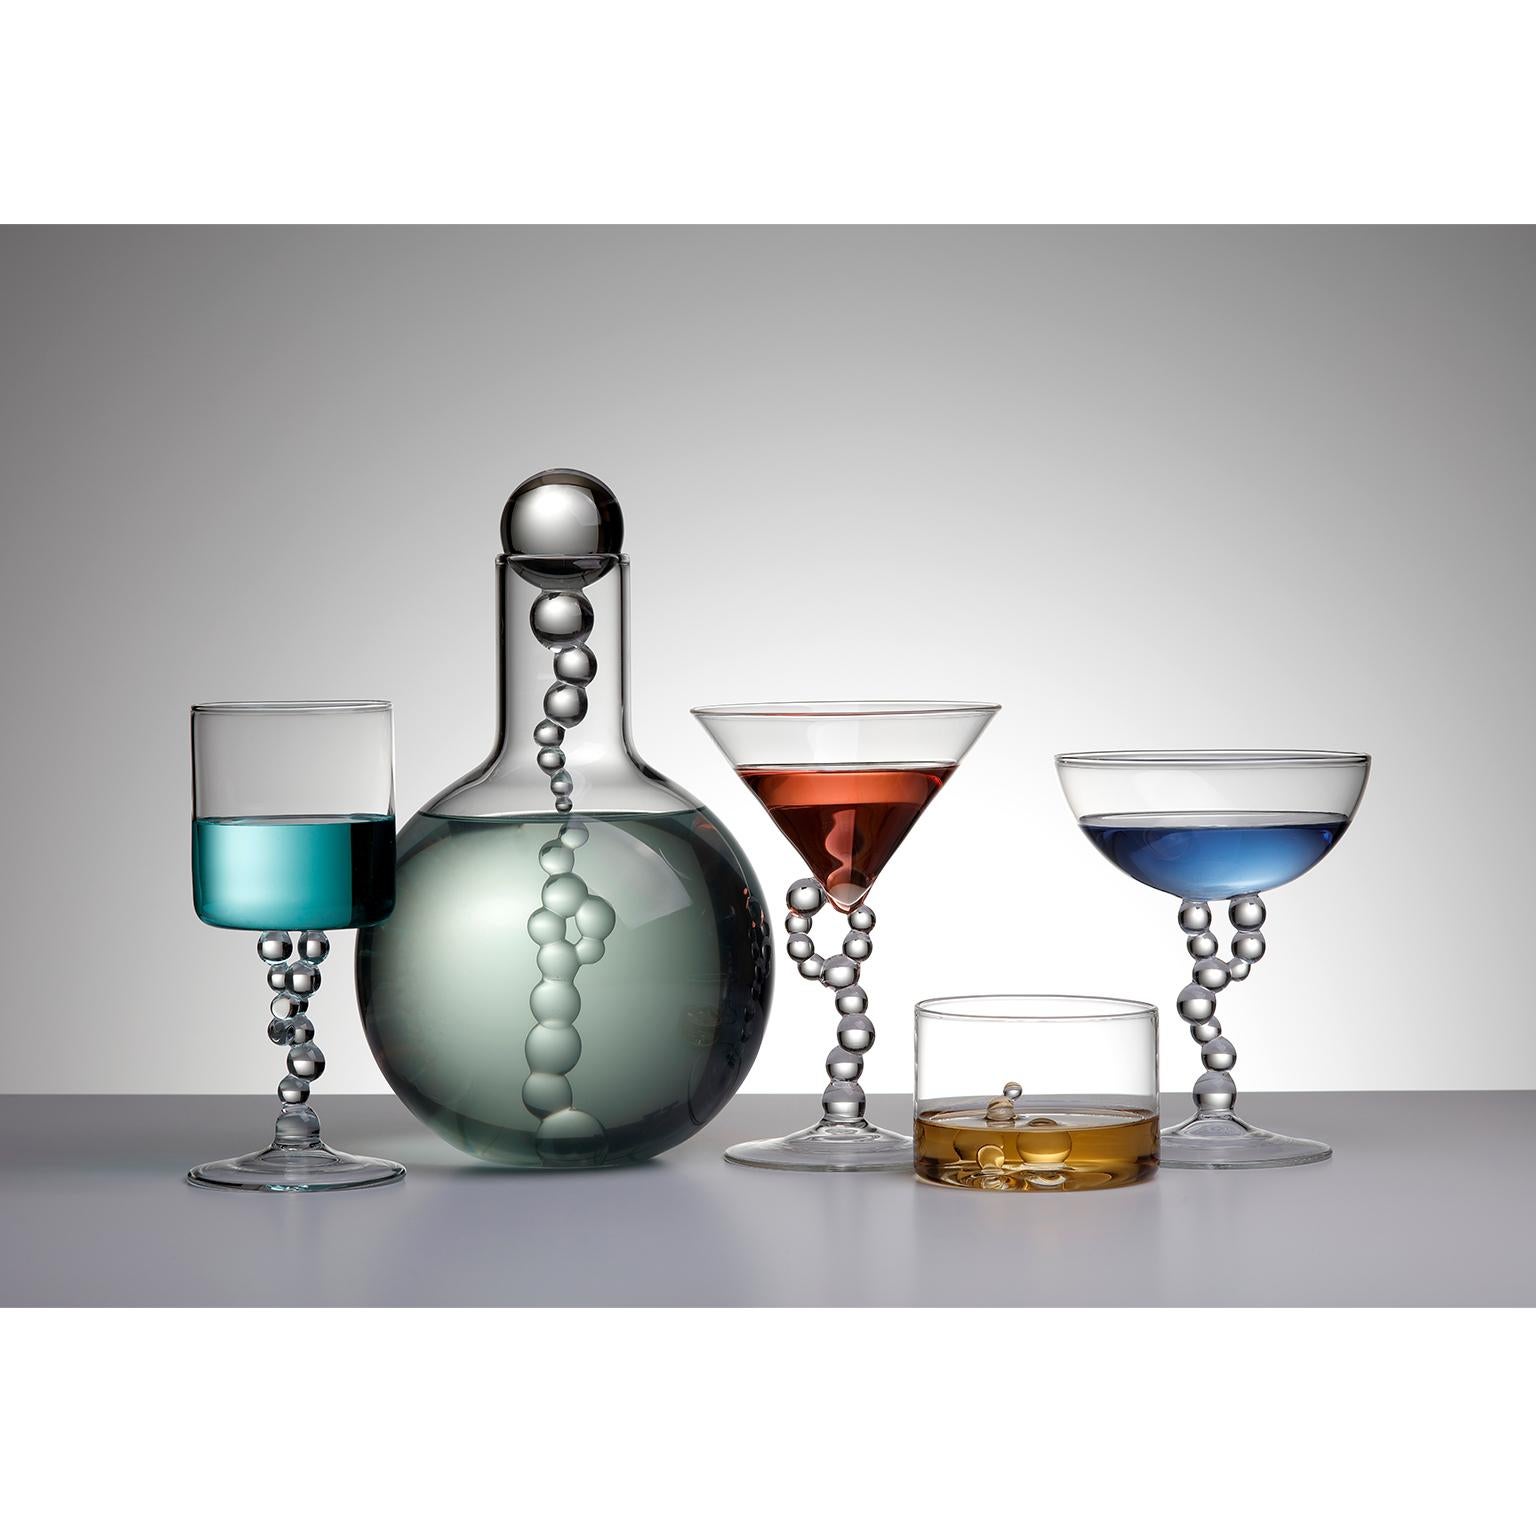 'Alchemica Old Fashioned Set’ 2 Hand Blown Glasses and Bottle by Simone Crestani For Sale 1